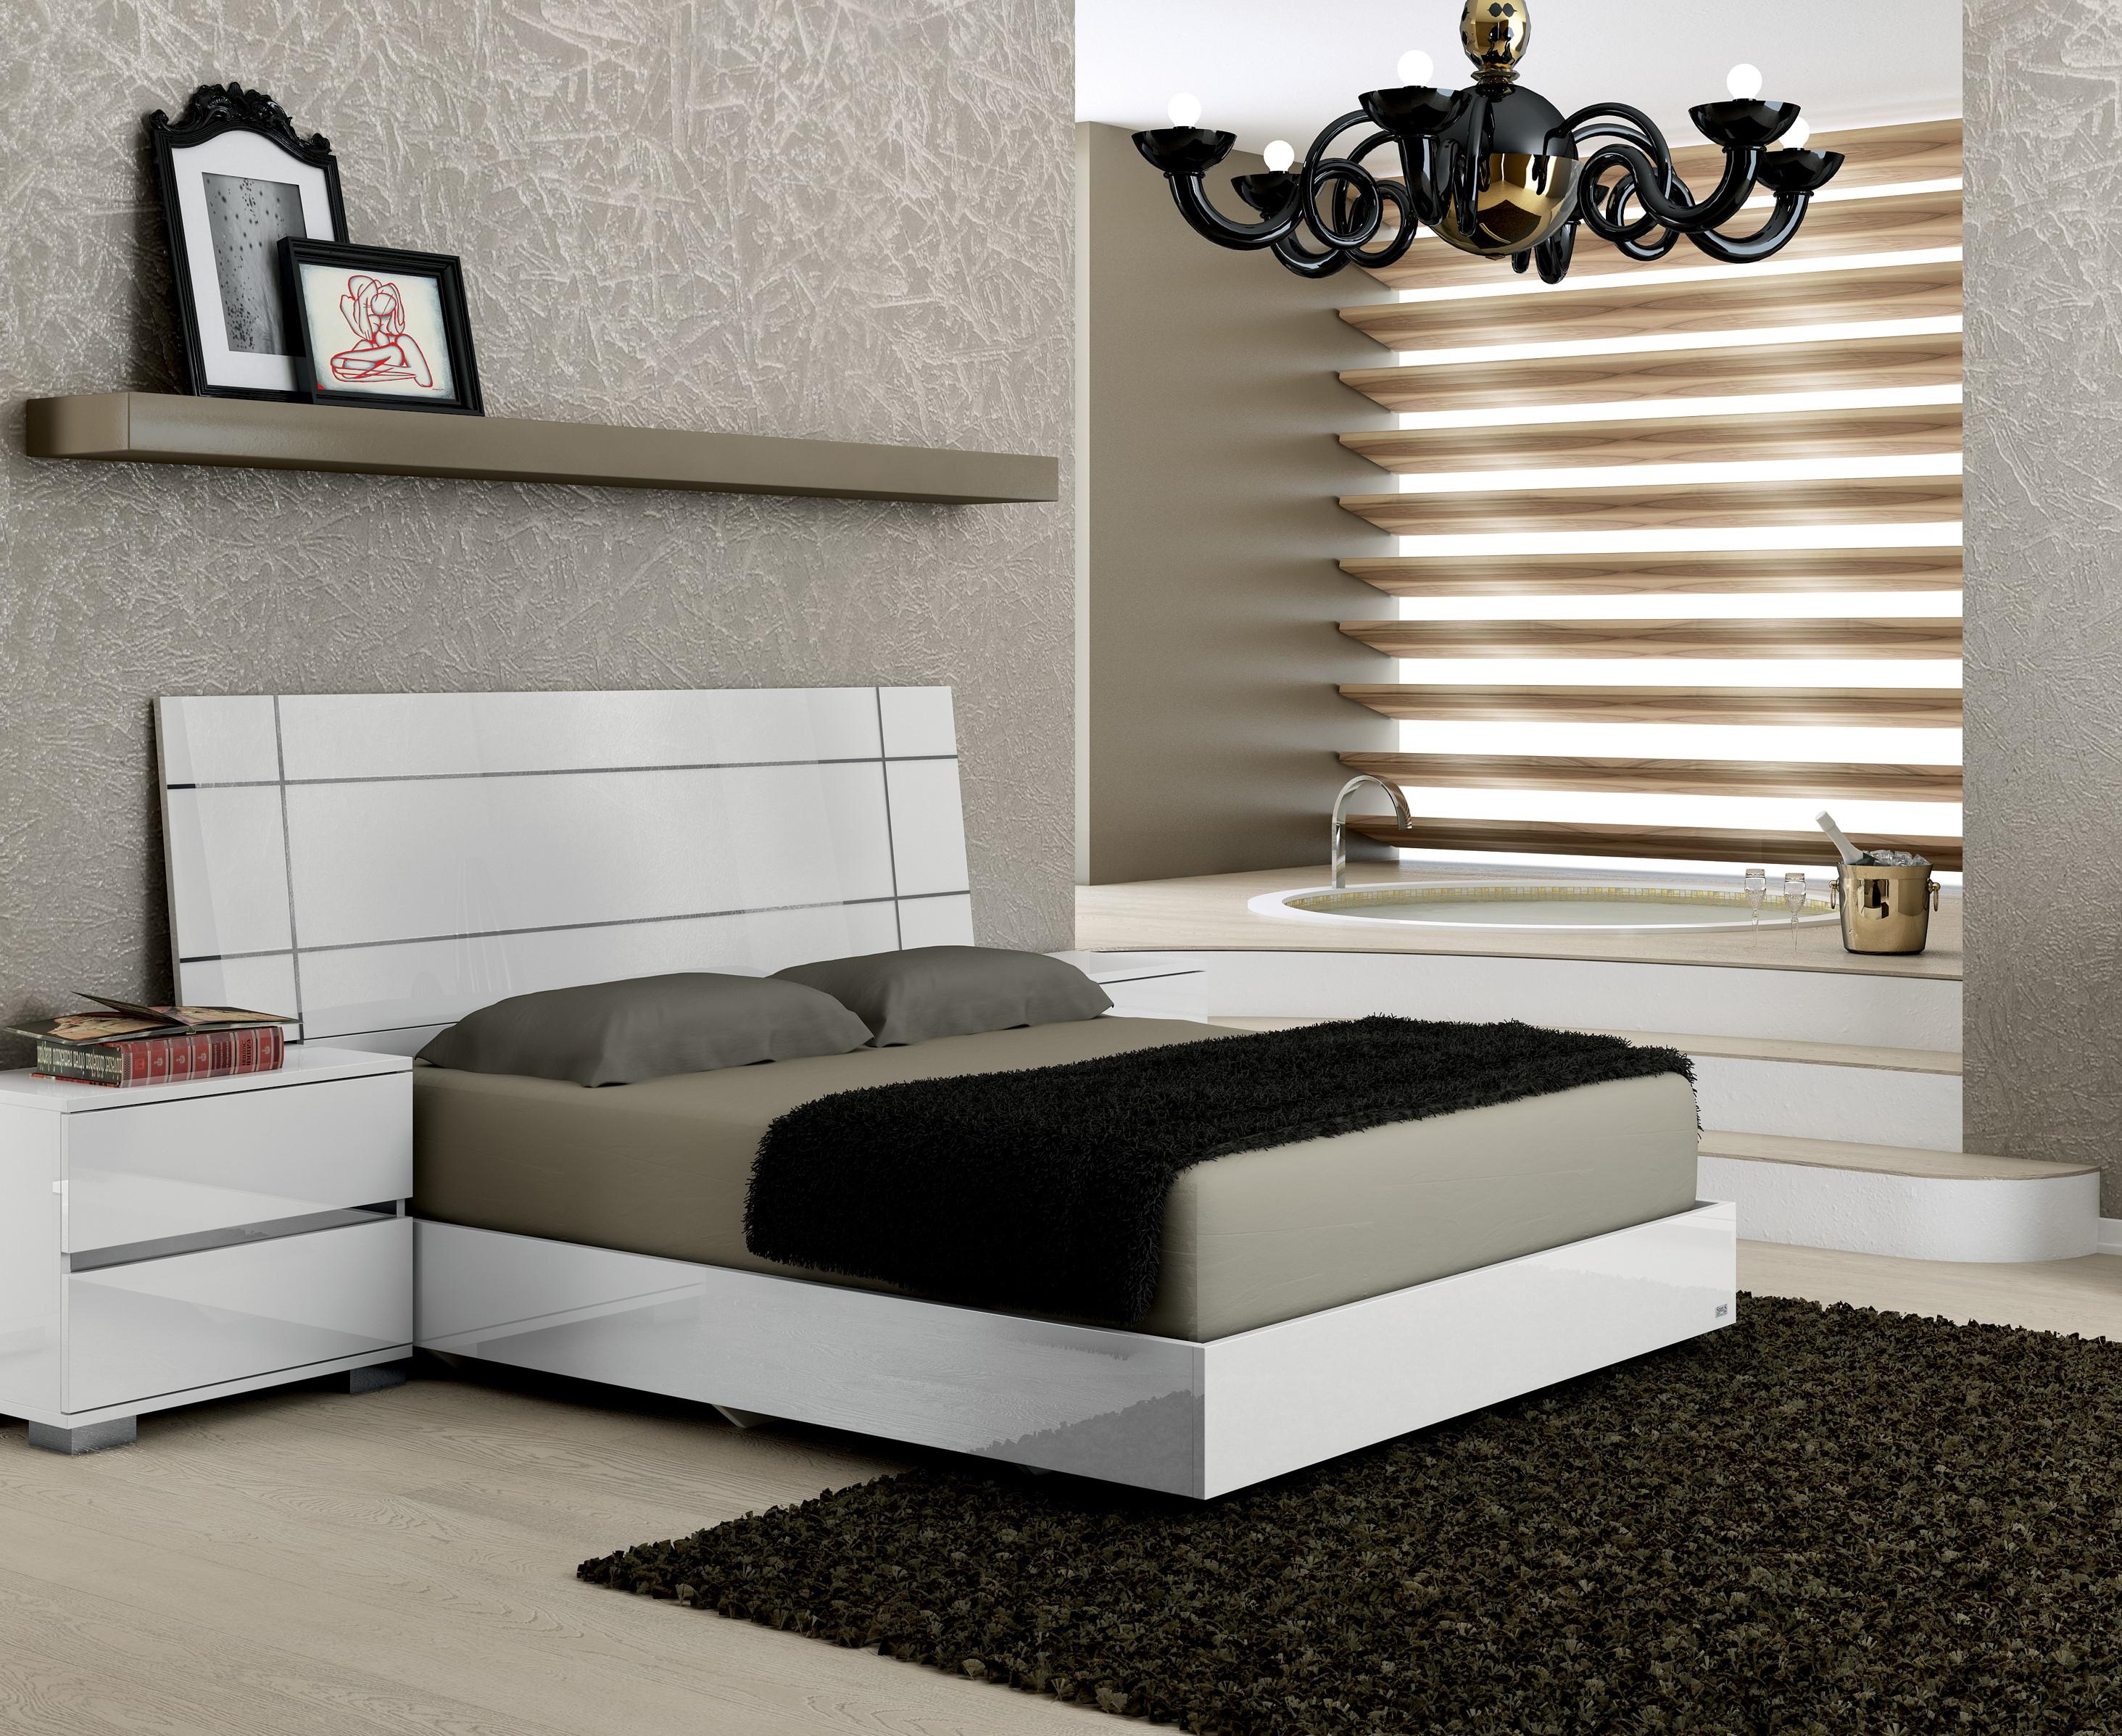 

    
At Home USA Dream White High Gloss Lacquer King Bed Contemporary Made in Italy
